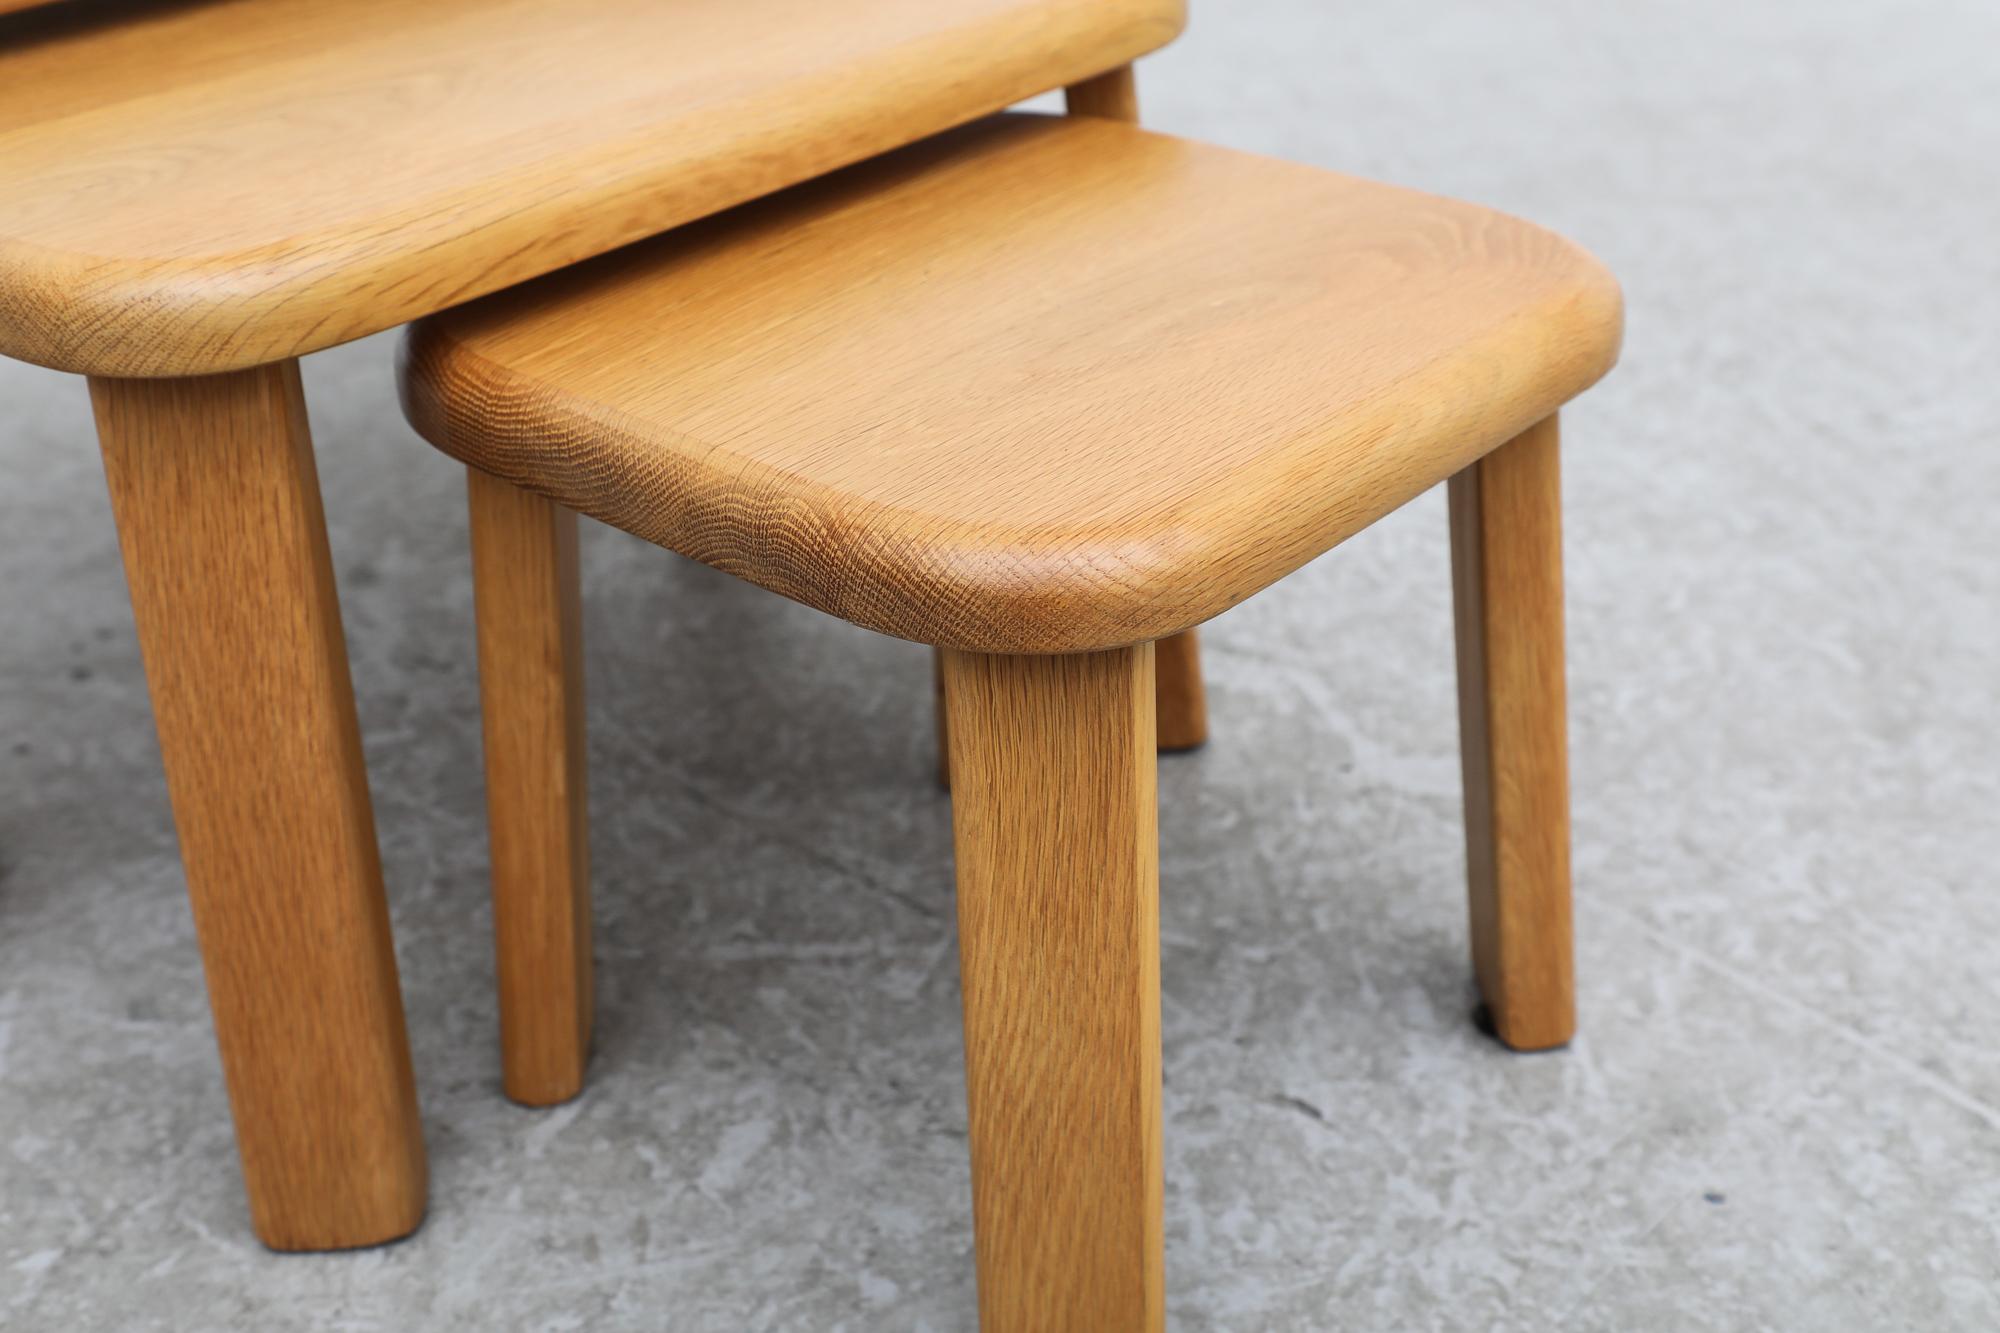 Set of 3 Charlotte Perriand Inspired Natural Oak Nesting Tables w/ Rounded Edges For Sale 9